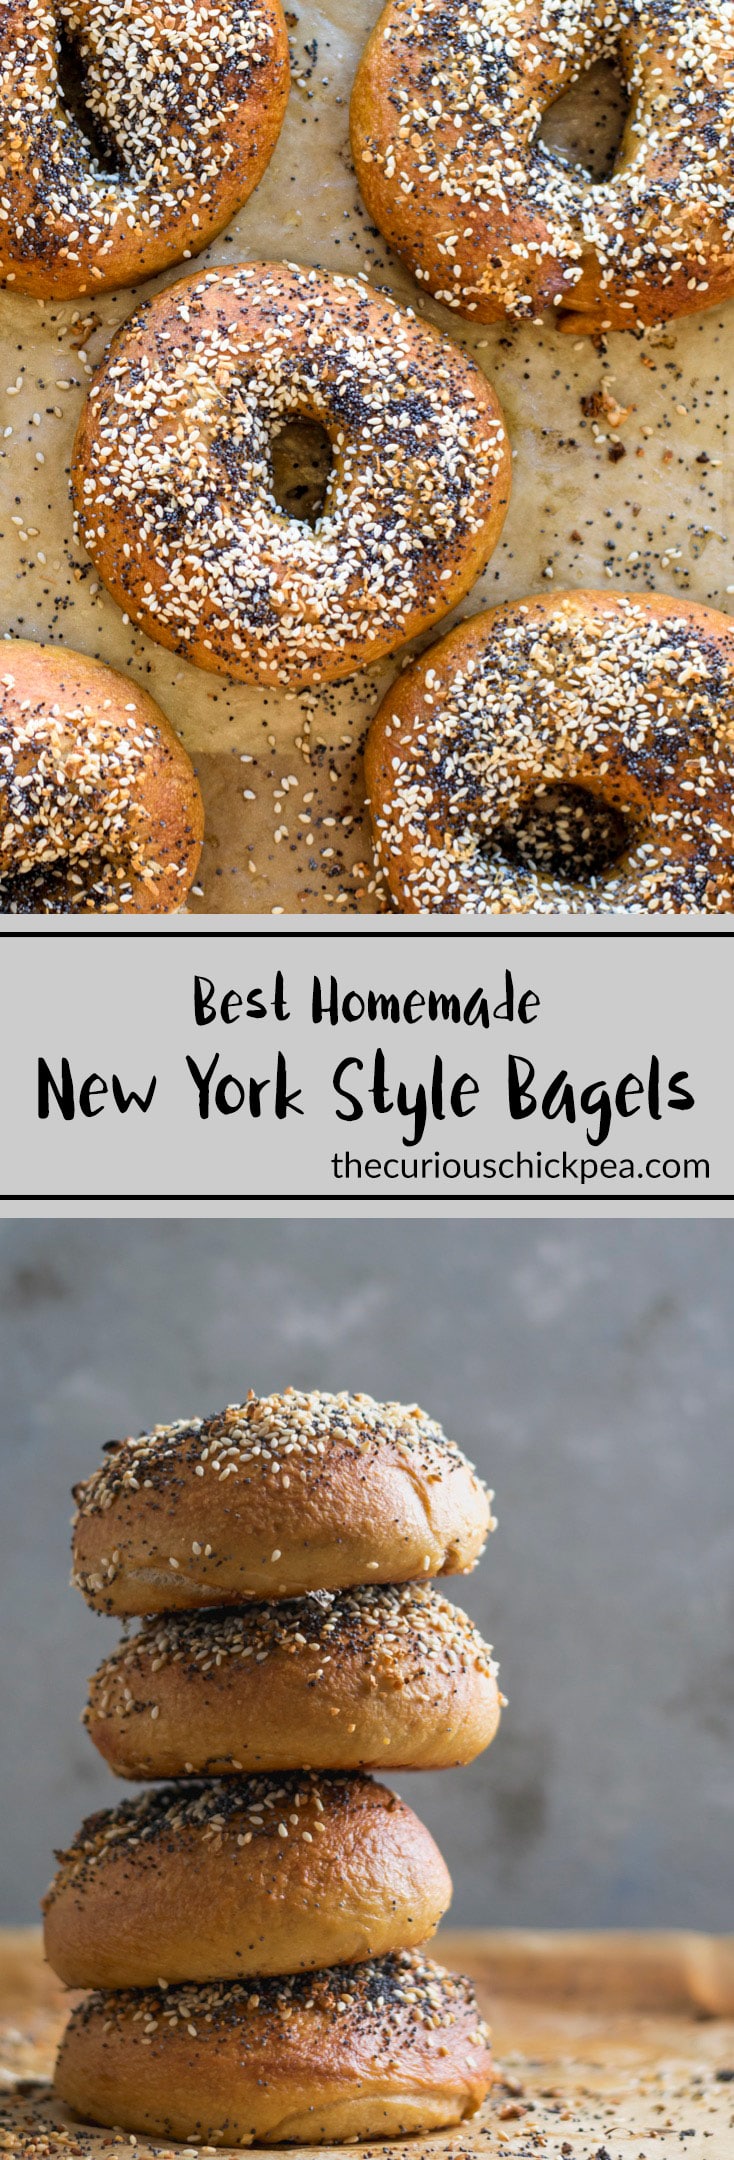 BEST Homemade New York Style Bagels | A step-by-step recipe and the science behind New York style bagels. Chewy and flavorful, they are made in the traditional method, with barley malt & boiling | thecuriouschickpea.com #vegan #bagels